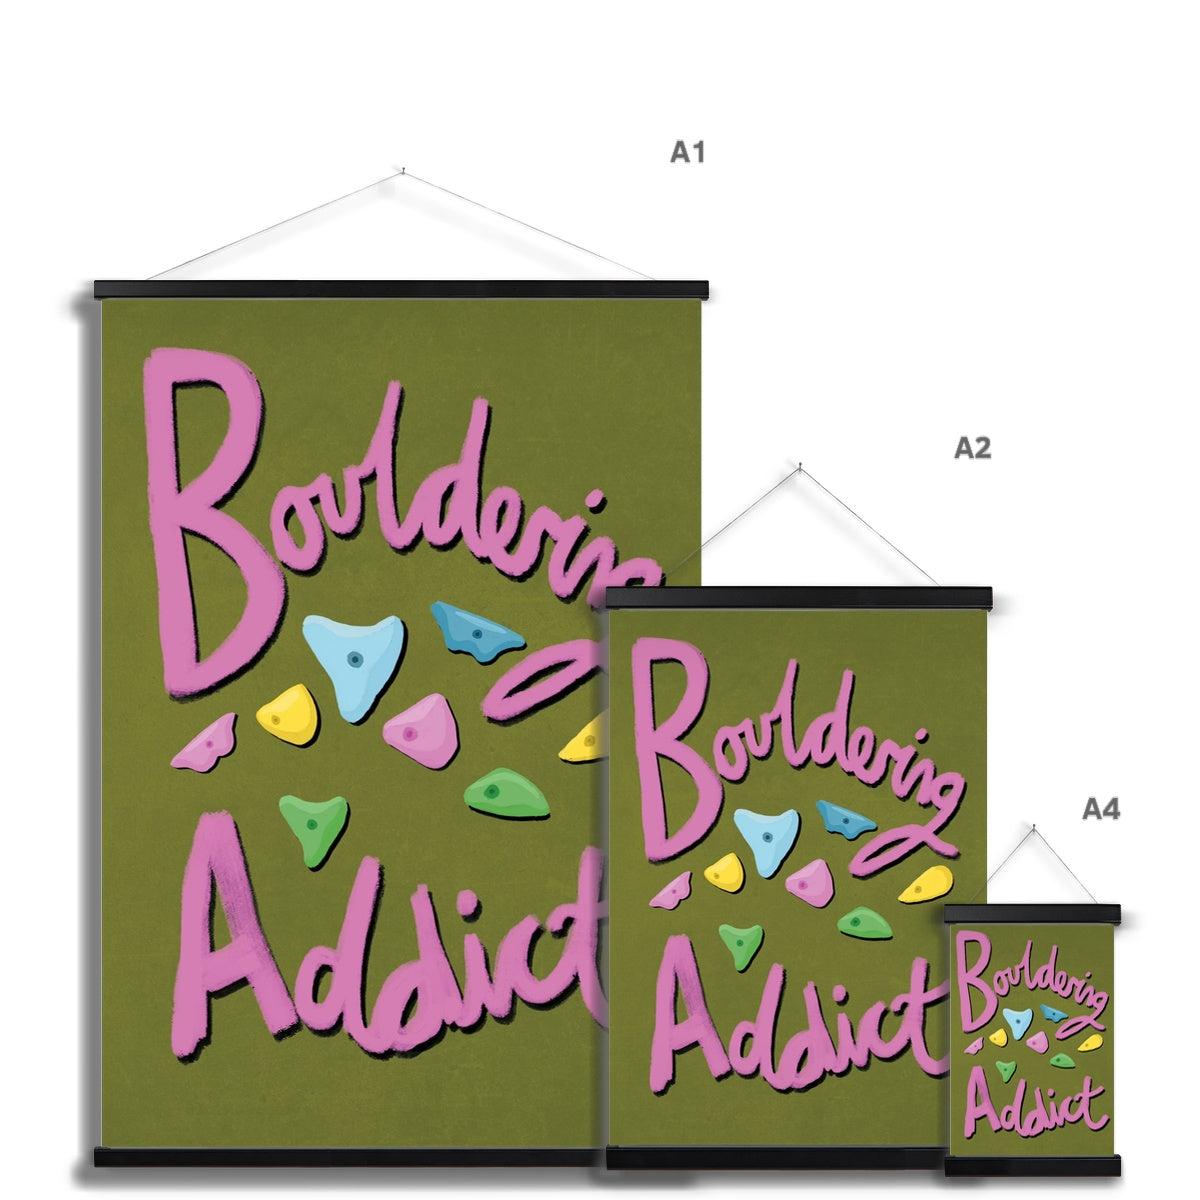 Bouldering Addict - Olive Green and Pink Fine Art Print with Hanger